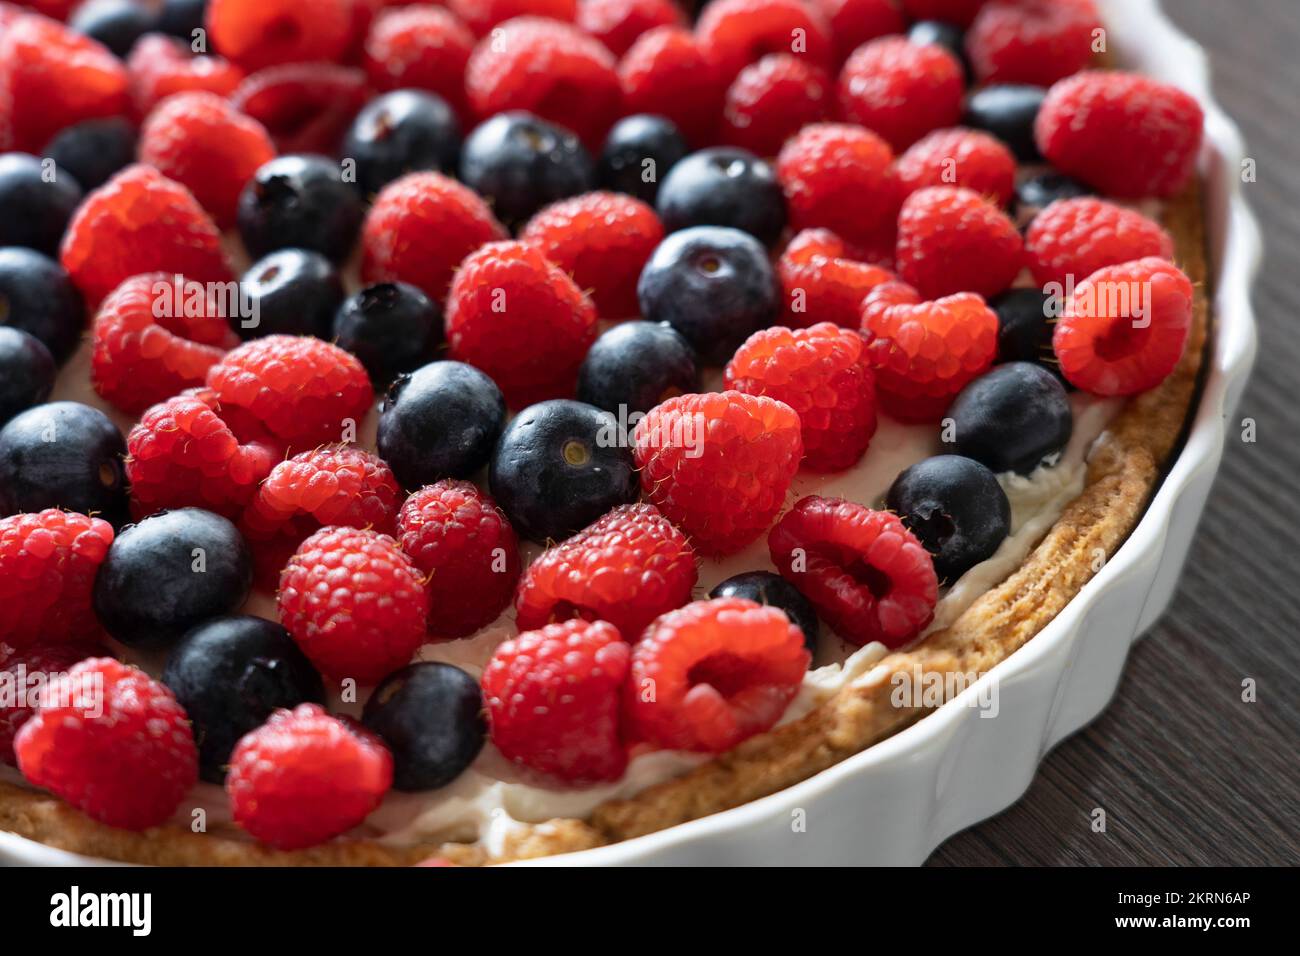 Delicious home made raspberry and blueberry mixed fruit pastry tart dessert in a white ceramic dish on a kitchen worktop Stock Photo